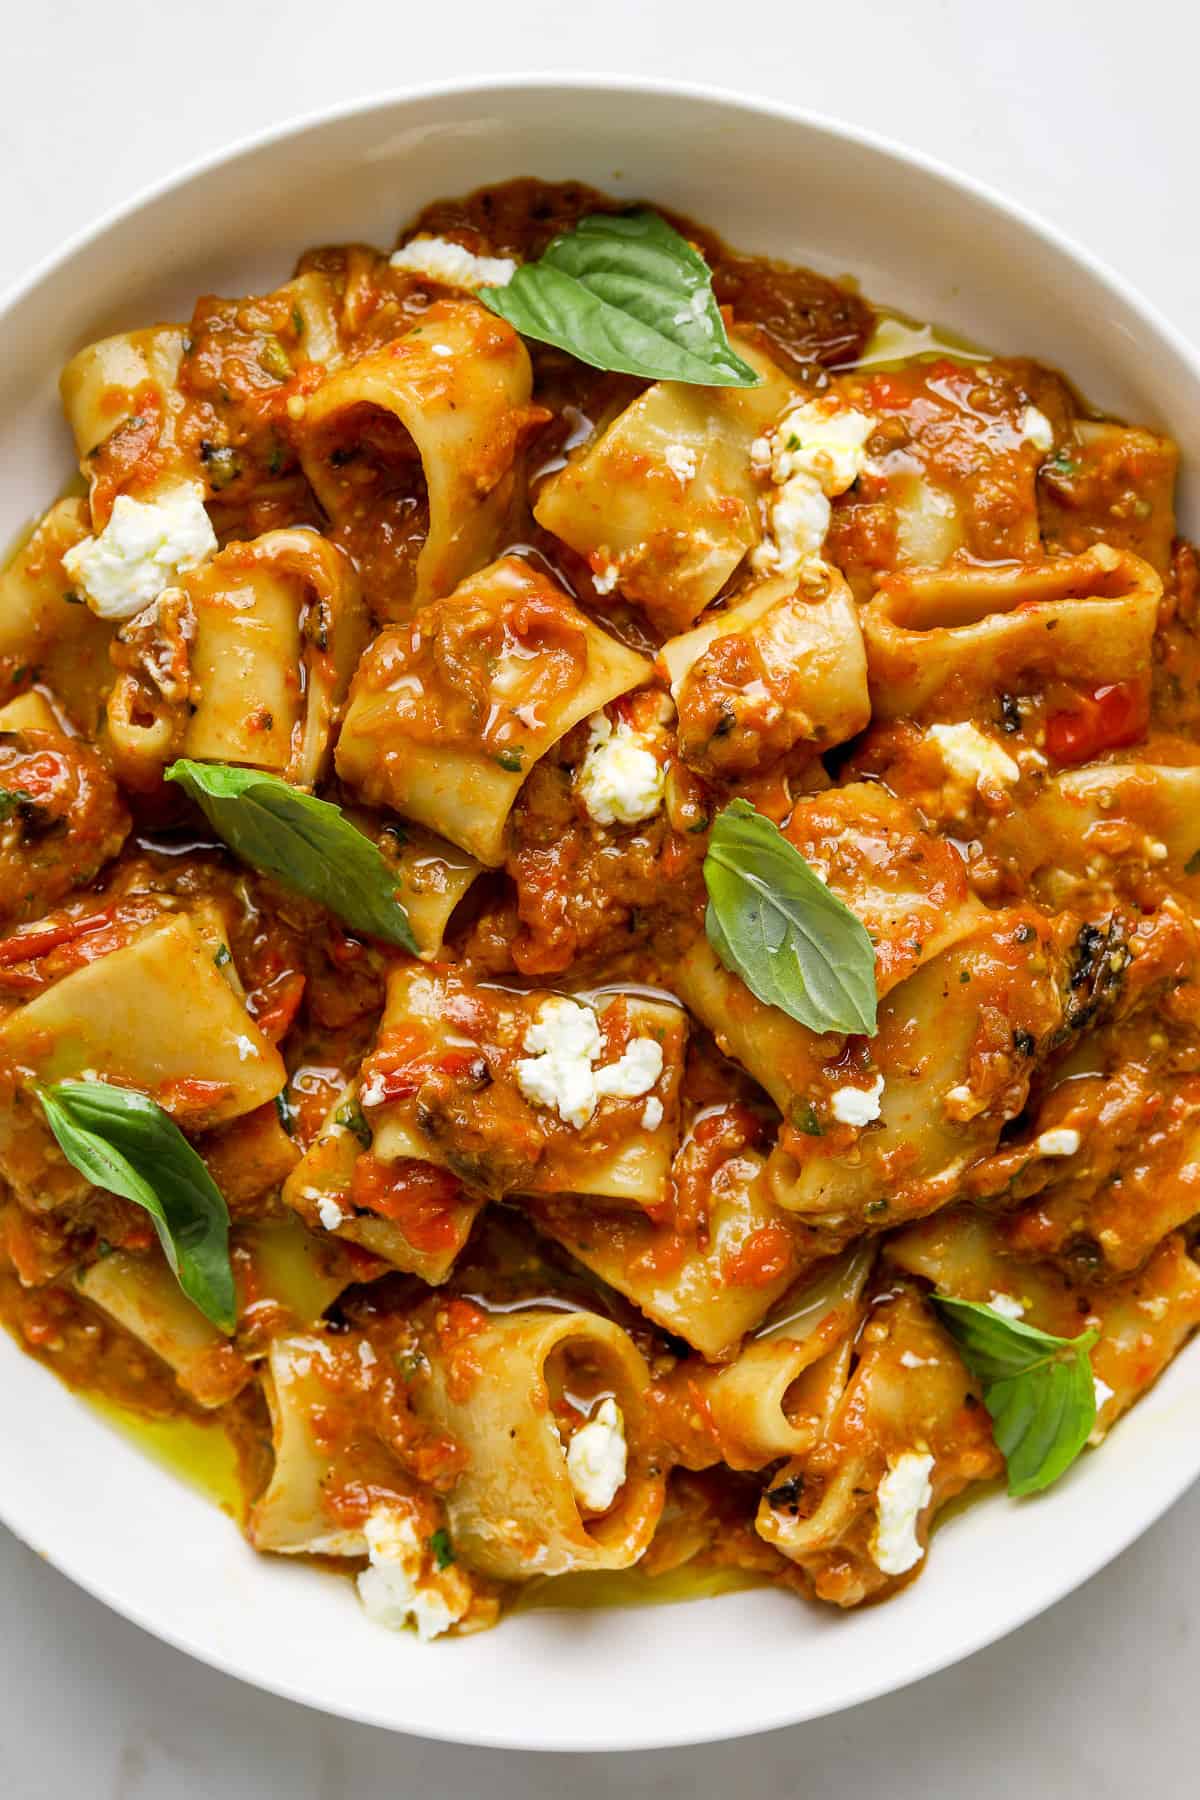 Slow-Roasted Eggplant Ragù with Goat Cheese and Basil